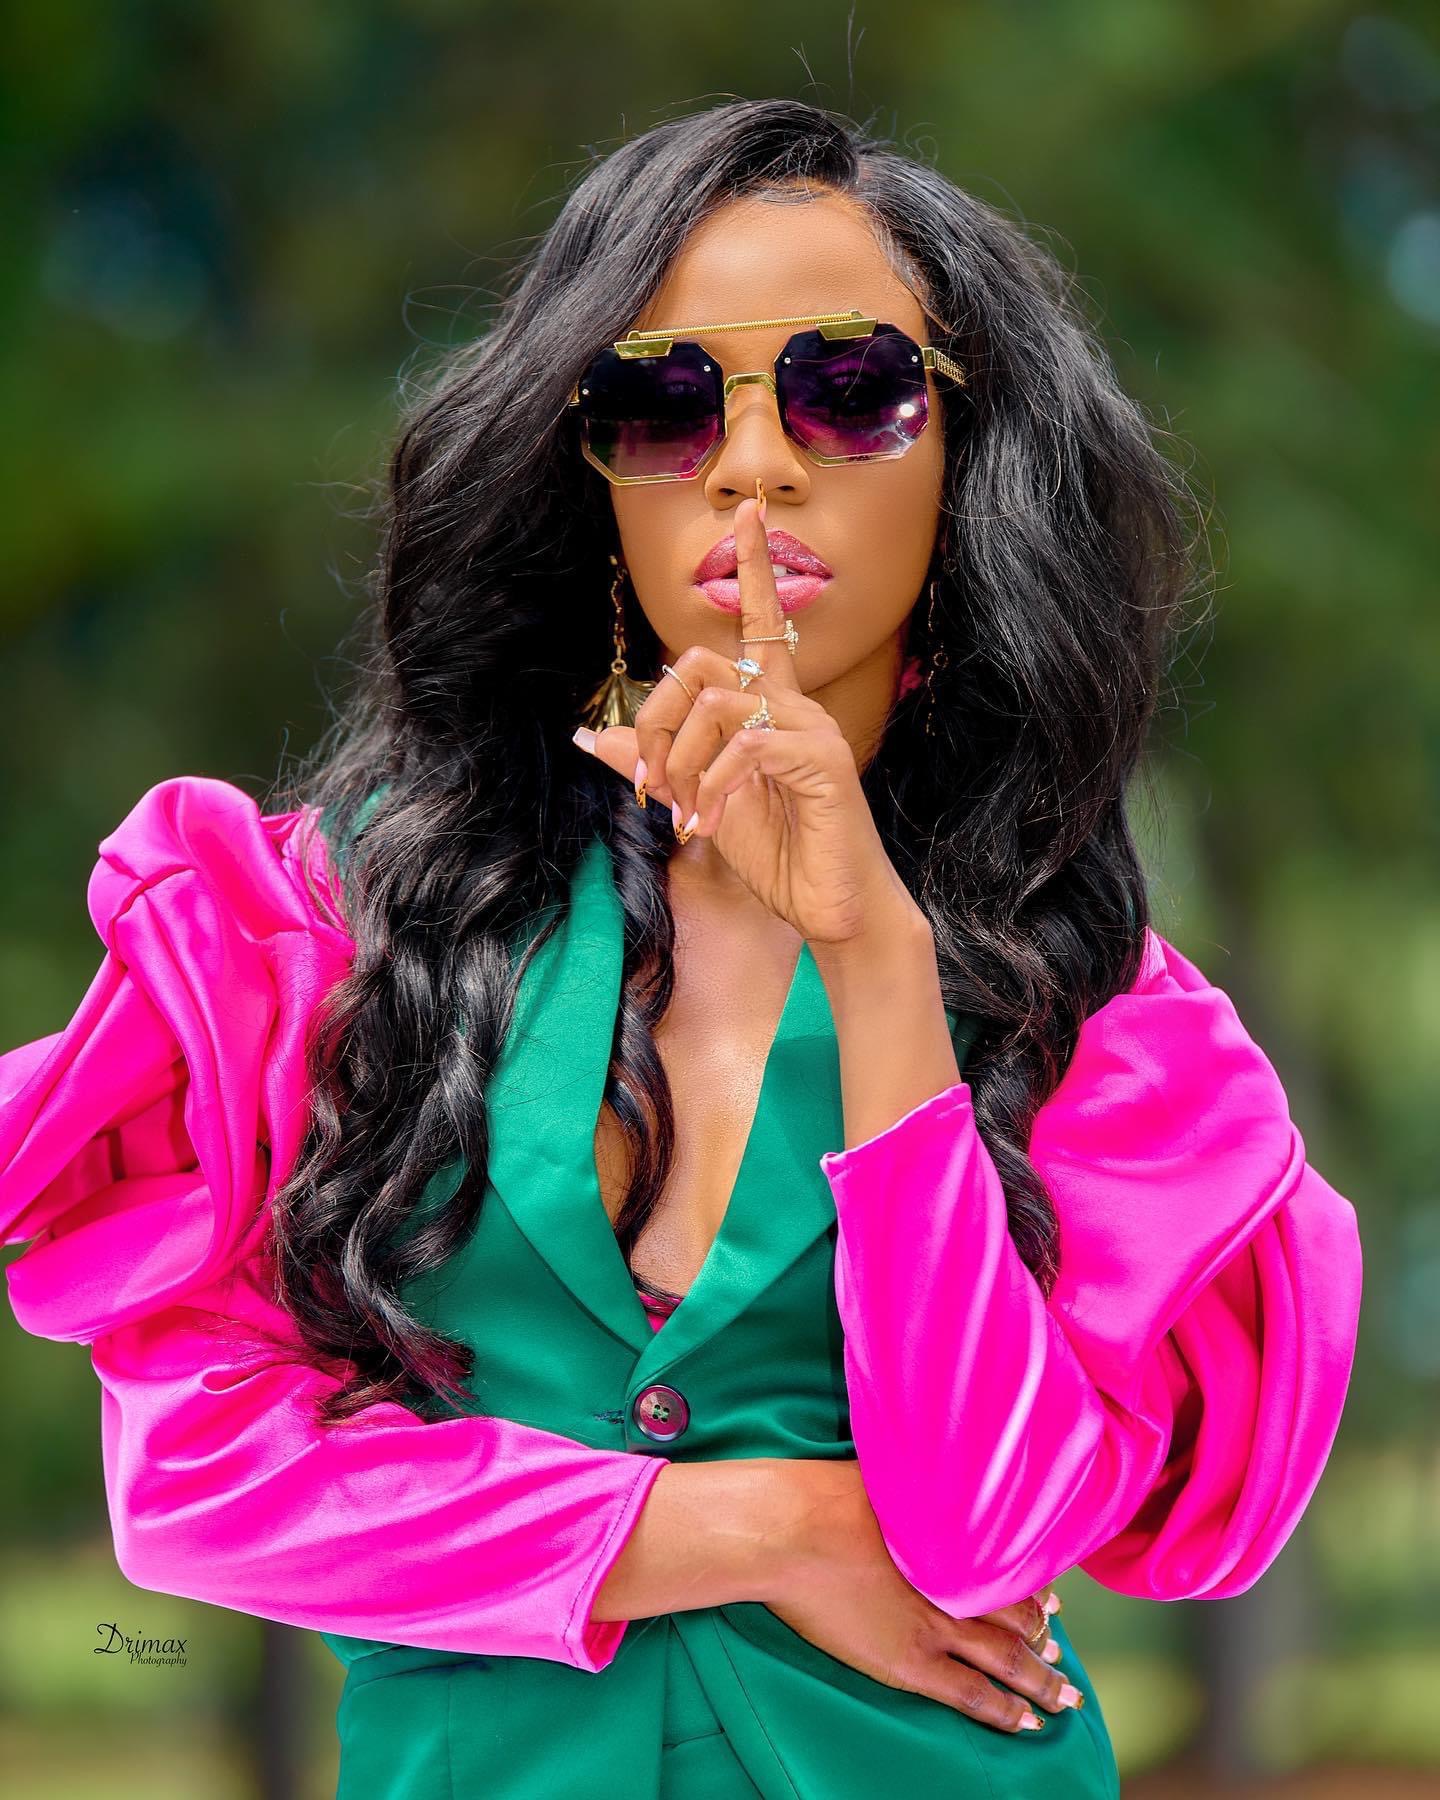 Audio Review: Thank God by Vinka